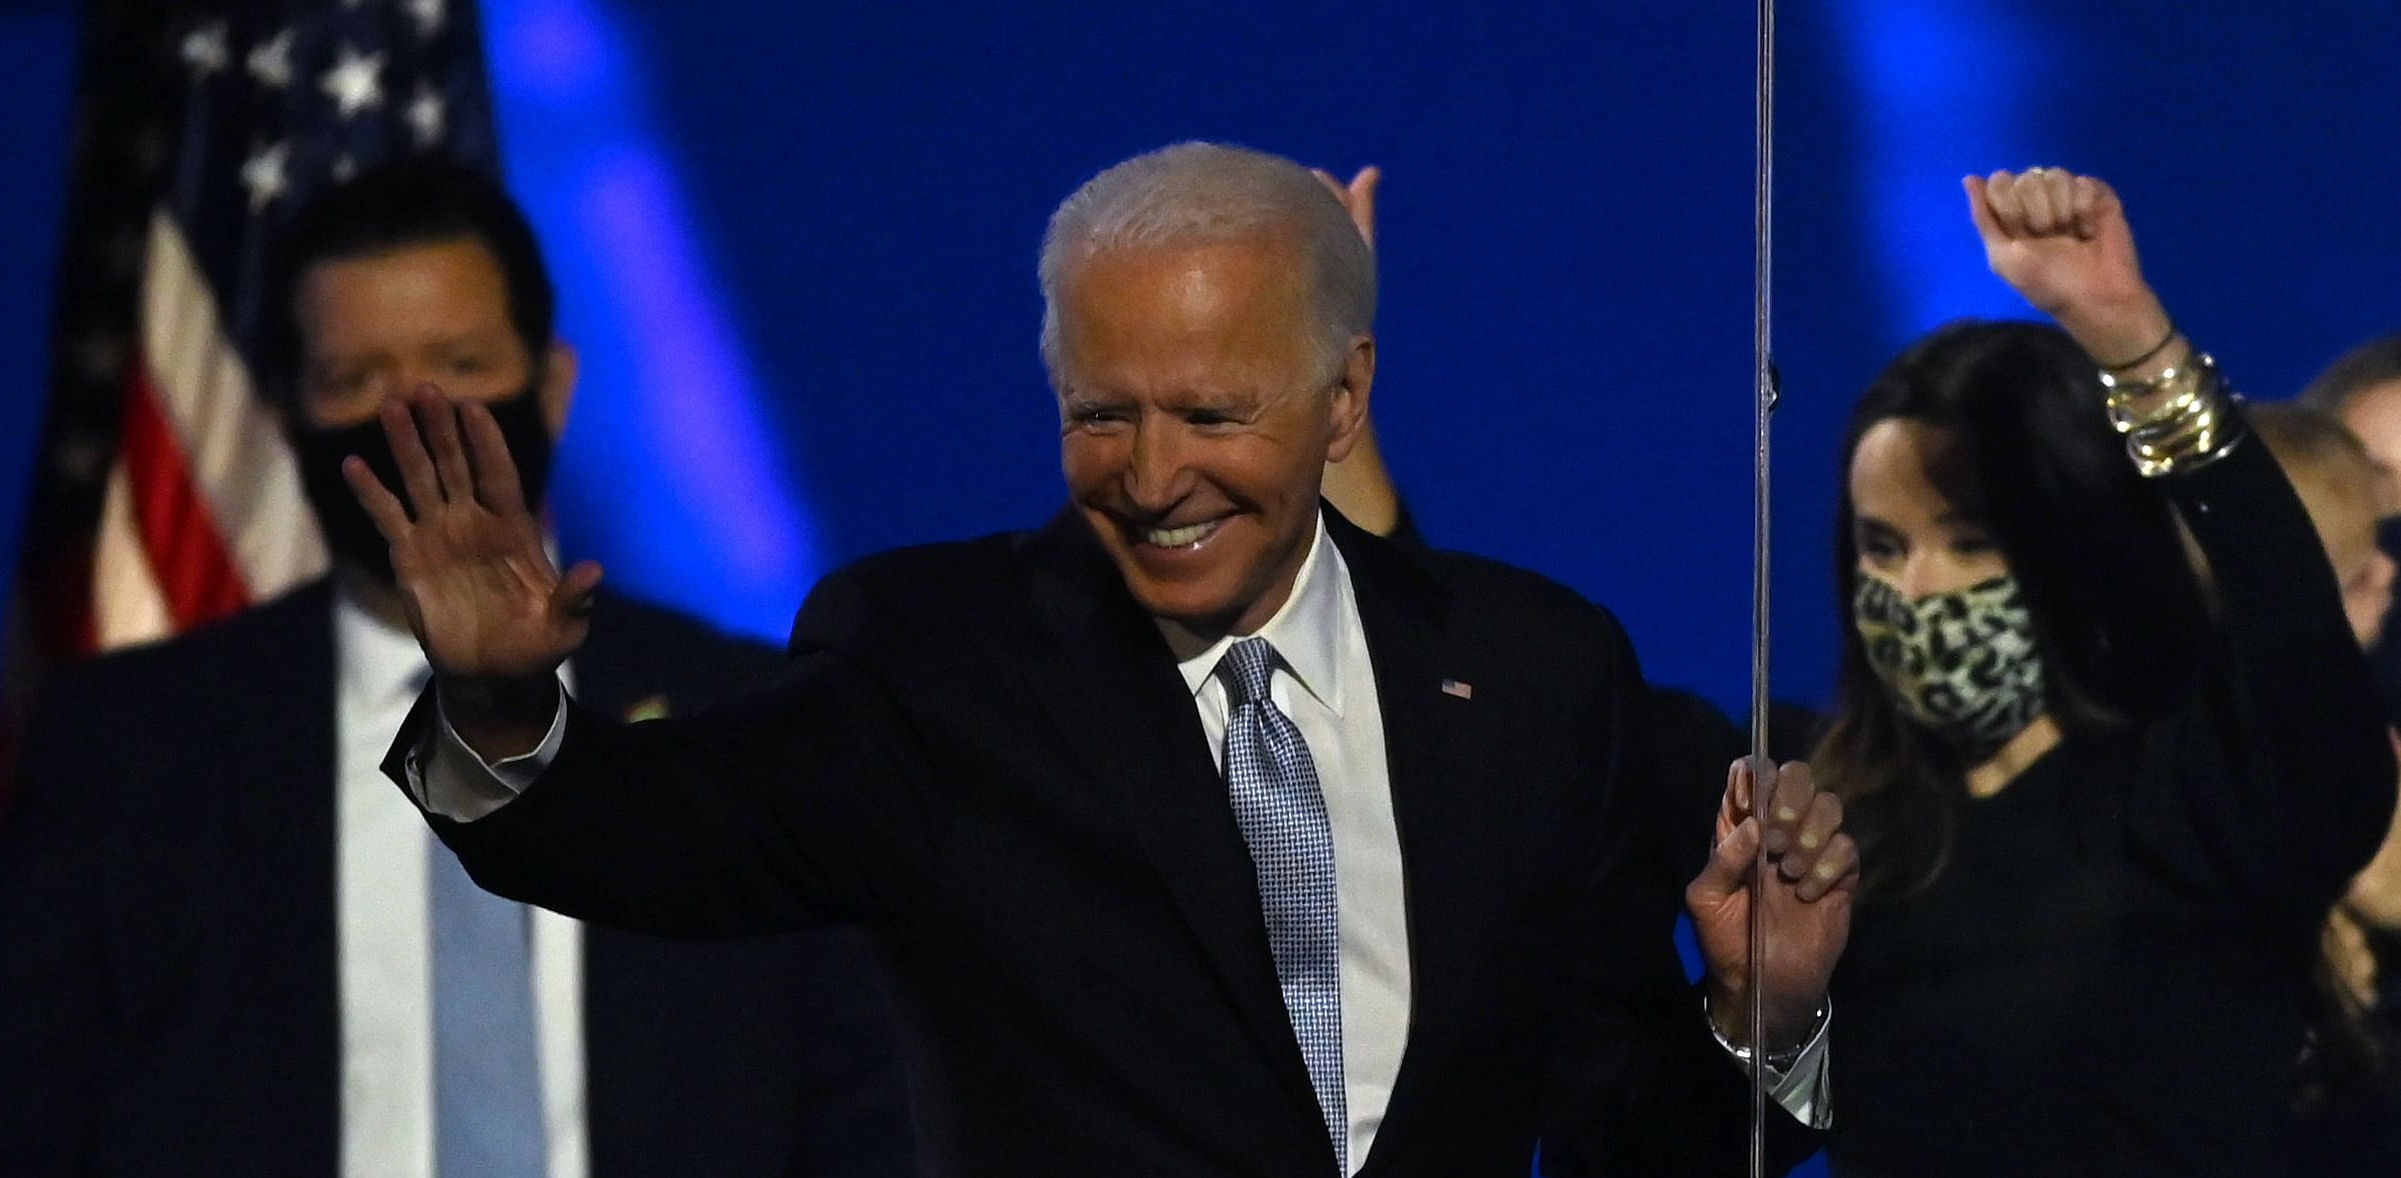 Opposition leaders, including Rahul Gandhi, Sharad Pawar, M K Stalin, Shashi Tharoor, among others were quick with congratulatory messages to President-elect Joe Biden and Vice President-elect Kamala Harris within minutes of American media houses projecting a win for the Democrats in the US. Credit: AFP